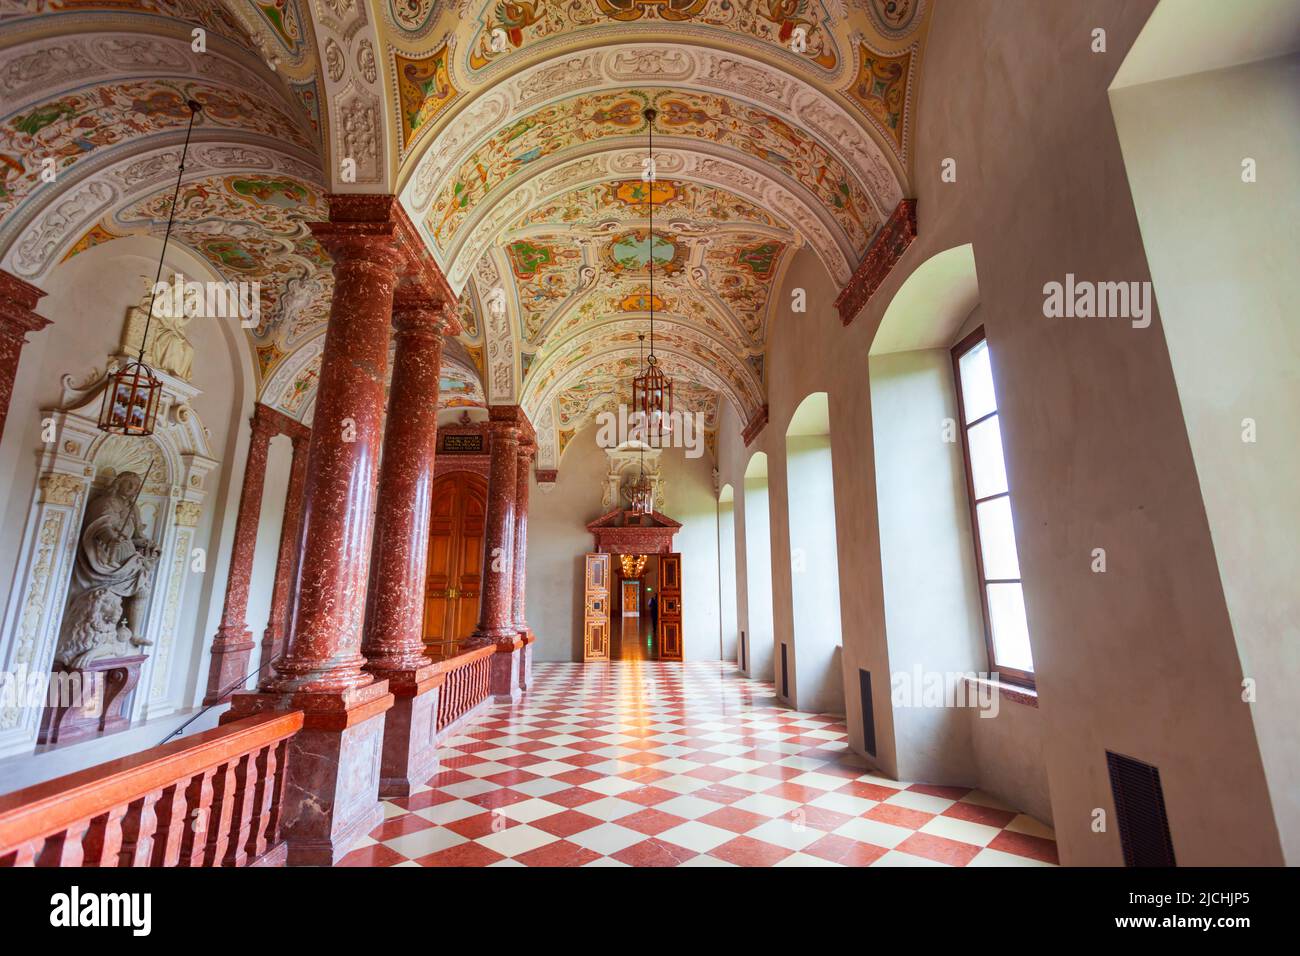 Munich, Germany - July 07, 2021: Munich Residence Museum interior. Munchen Residenz is the former royal palace in Munich, Germany. Stock Photo